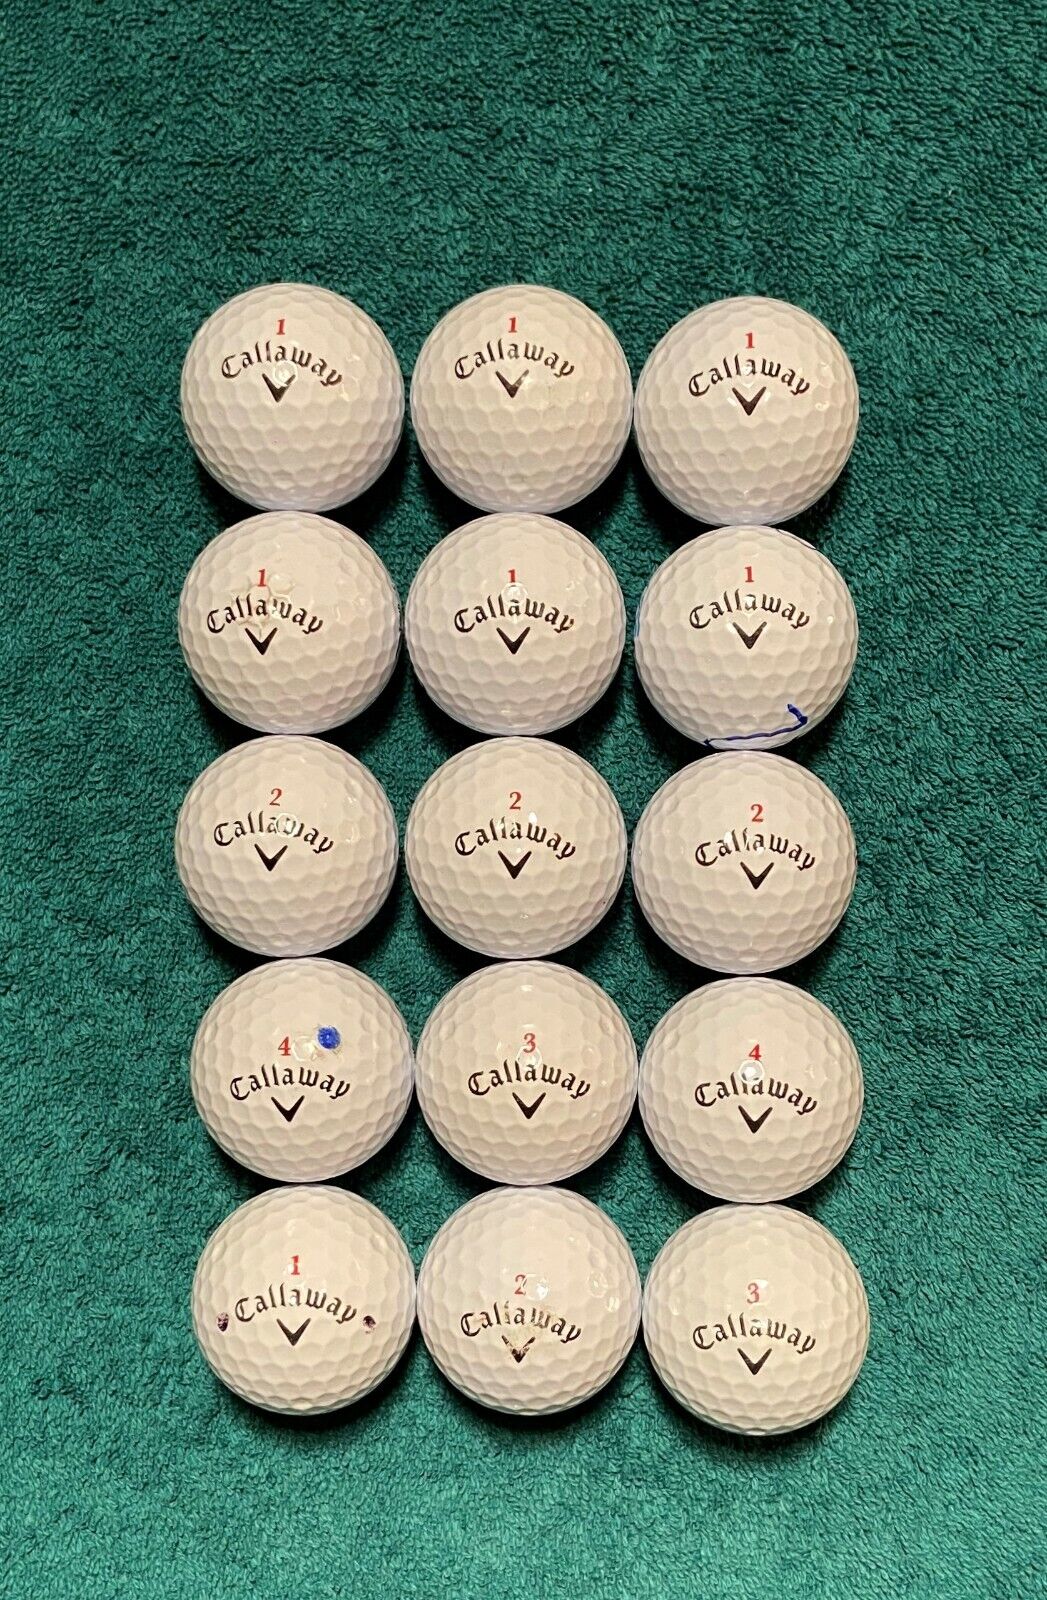 15 Callaway Tour iS i(s) Golf Balls ++++ Each Ball Condition Rated from 80 to 99